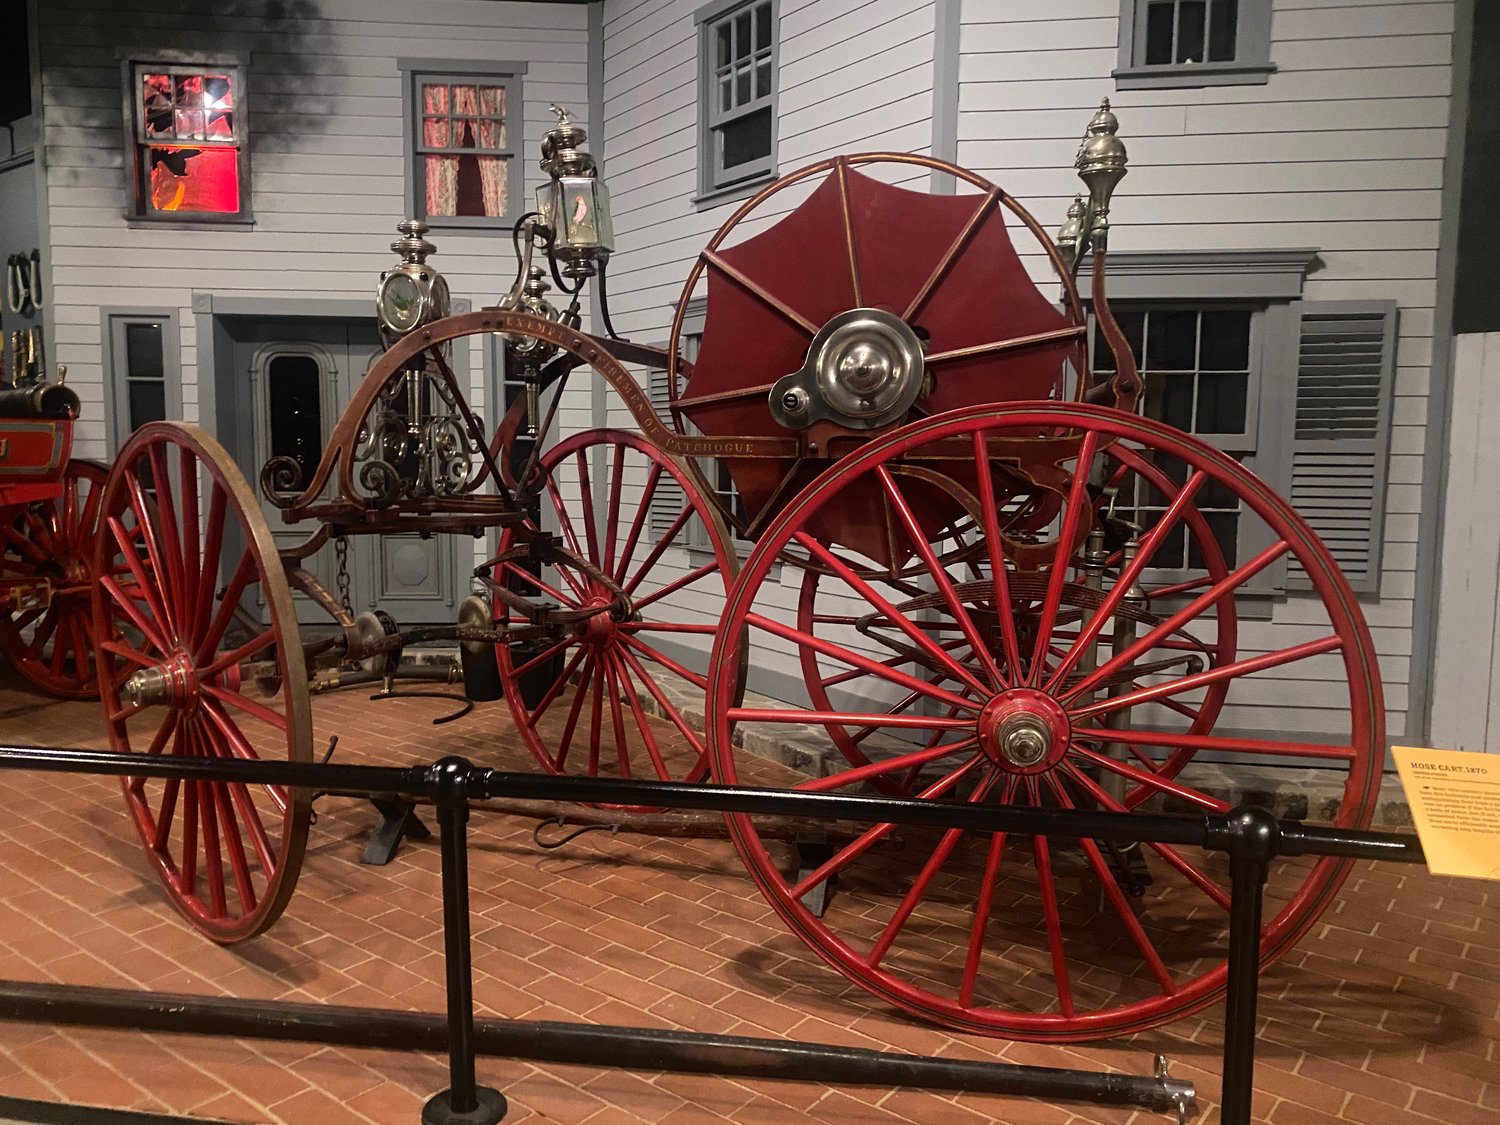 This hose cart was used by the firemen of Patchogue.